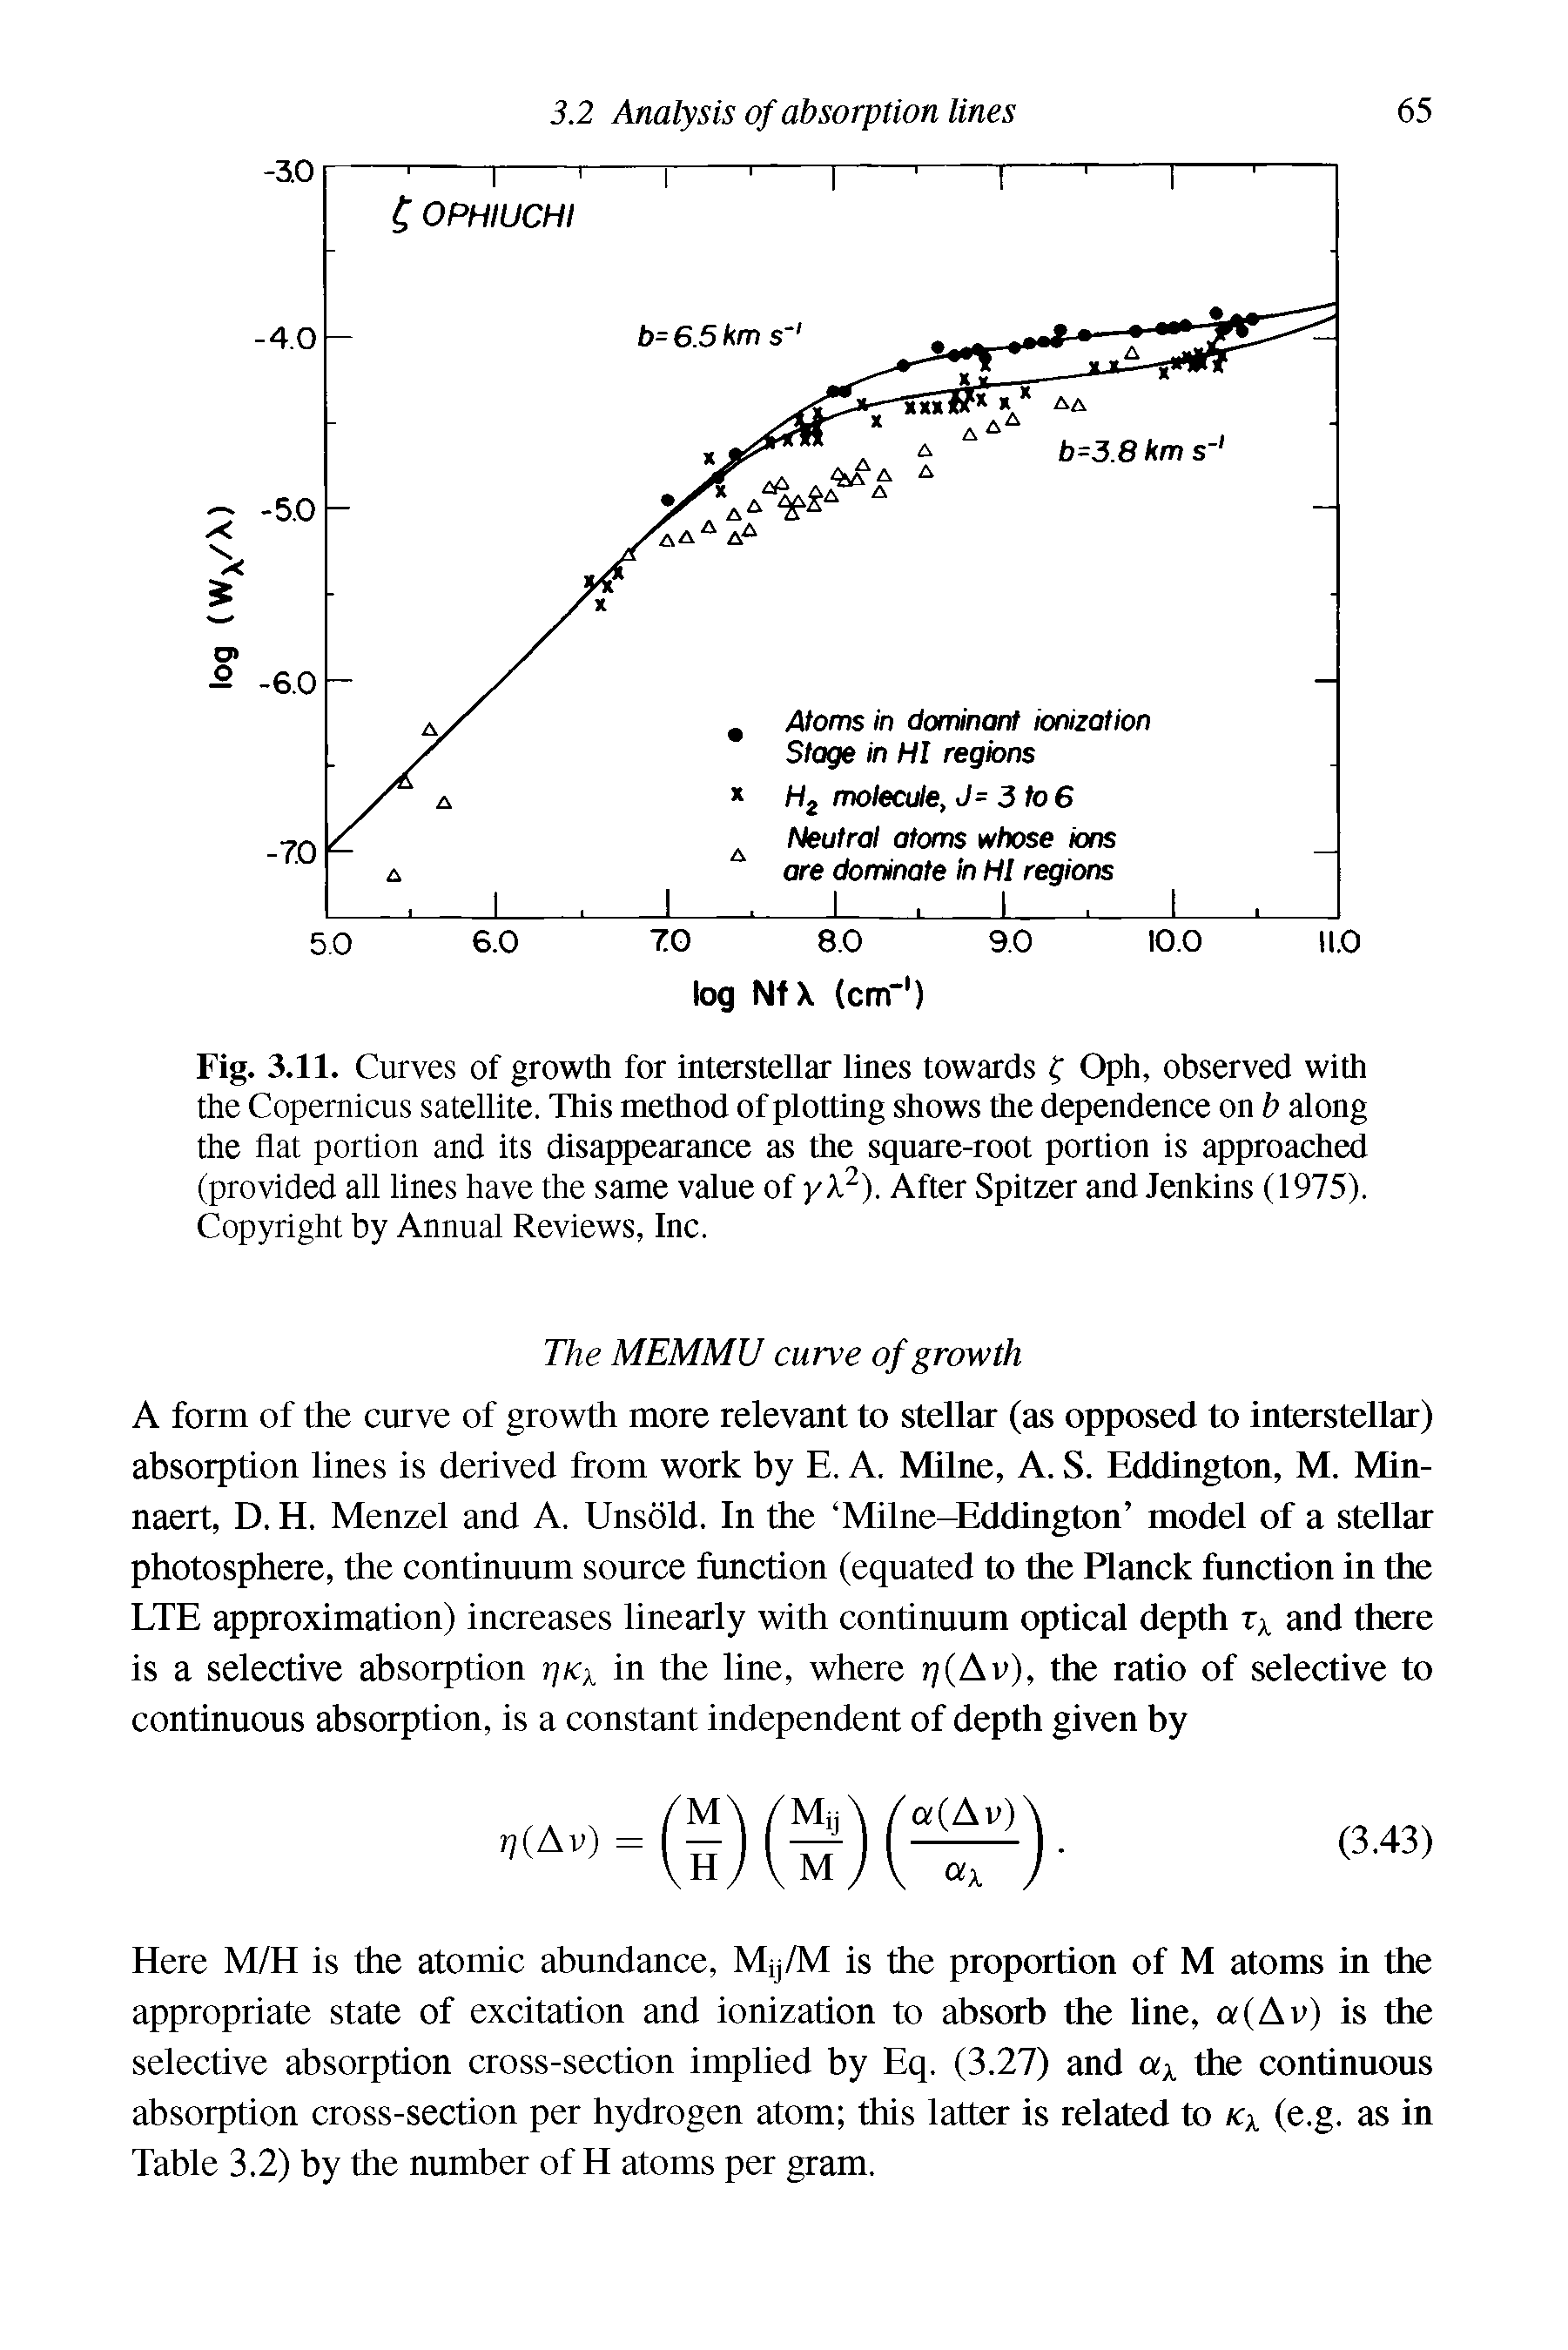 Fig. 3.11. Curves of growth for interstellar lines towards f Oph, observed with the Copernicus satellite. This method of plotting shows the dependence on b along the flat portion and its disappearance as the square-root portion is approached (provided all lines have the same value of yX2). After Spitzer and Jenkins (1975). Copyright by Annual Reviews, Inc.